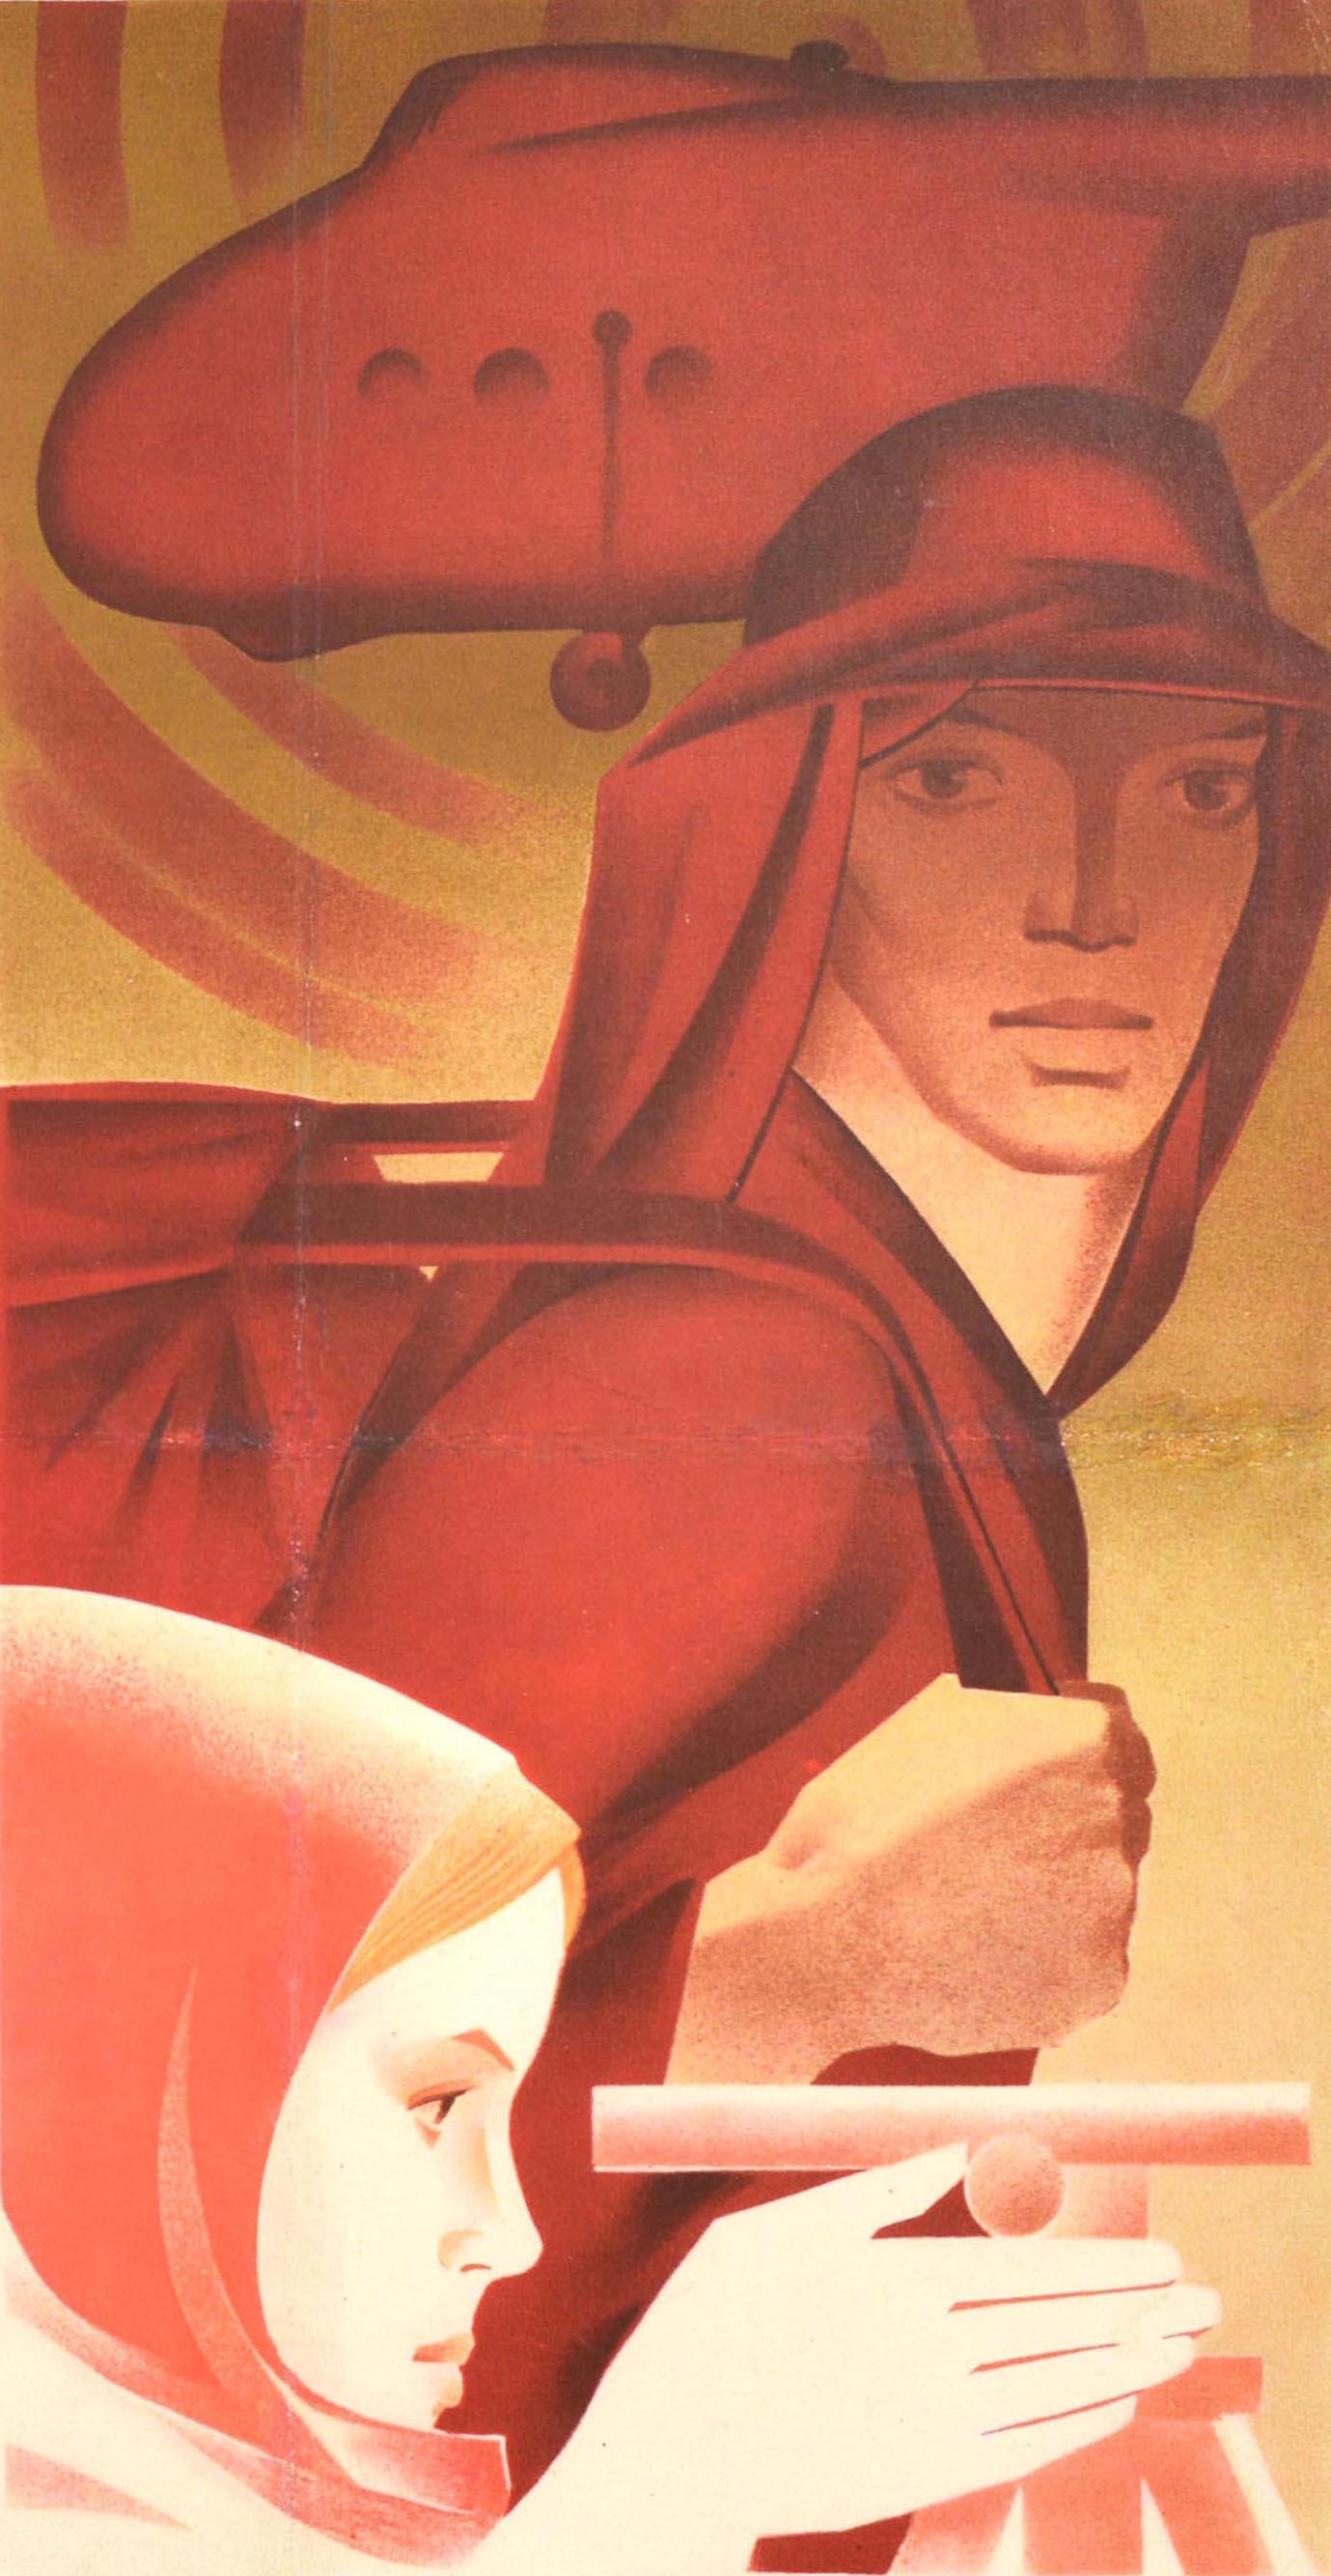 Original vintage Soviet propaganda poster - Our Women Are With Us! - featuring the slogan below three images, the first depicting a young lady in front of a soldier wearing a budenovka style hat with a red star on it and a horse in the background,